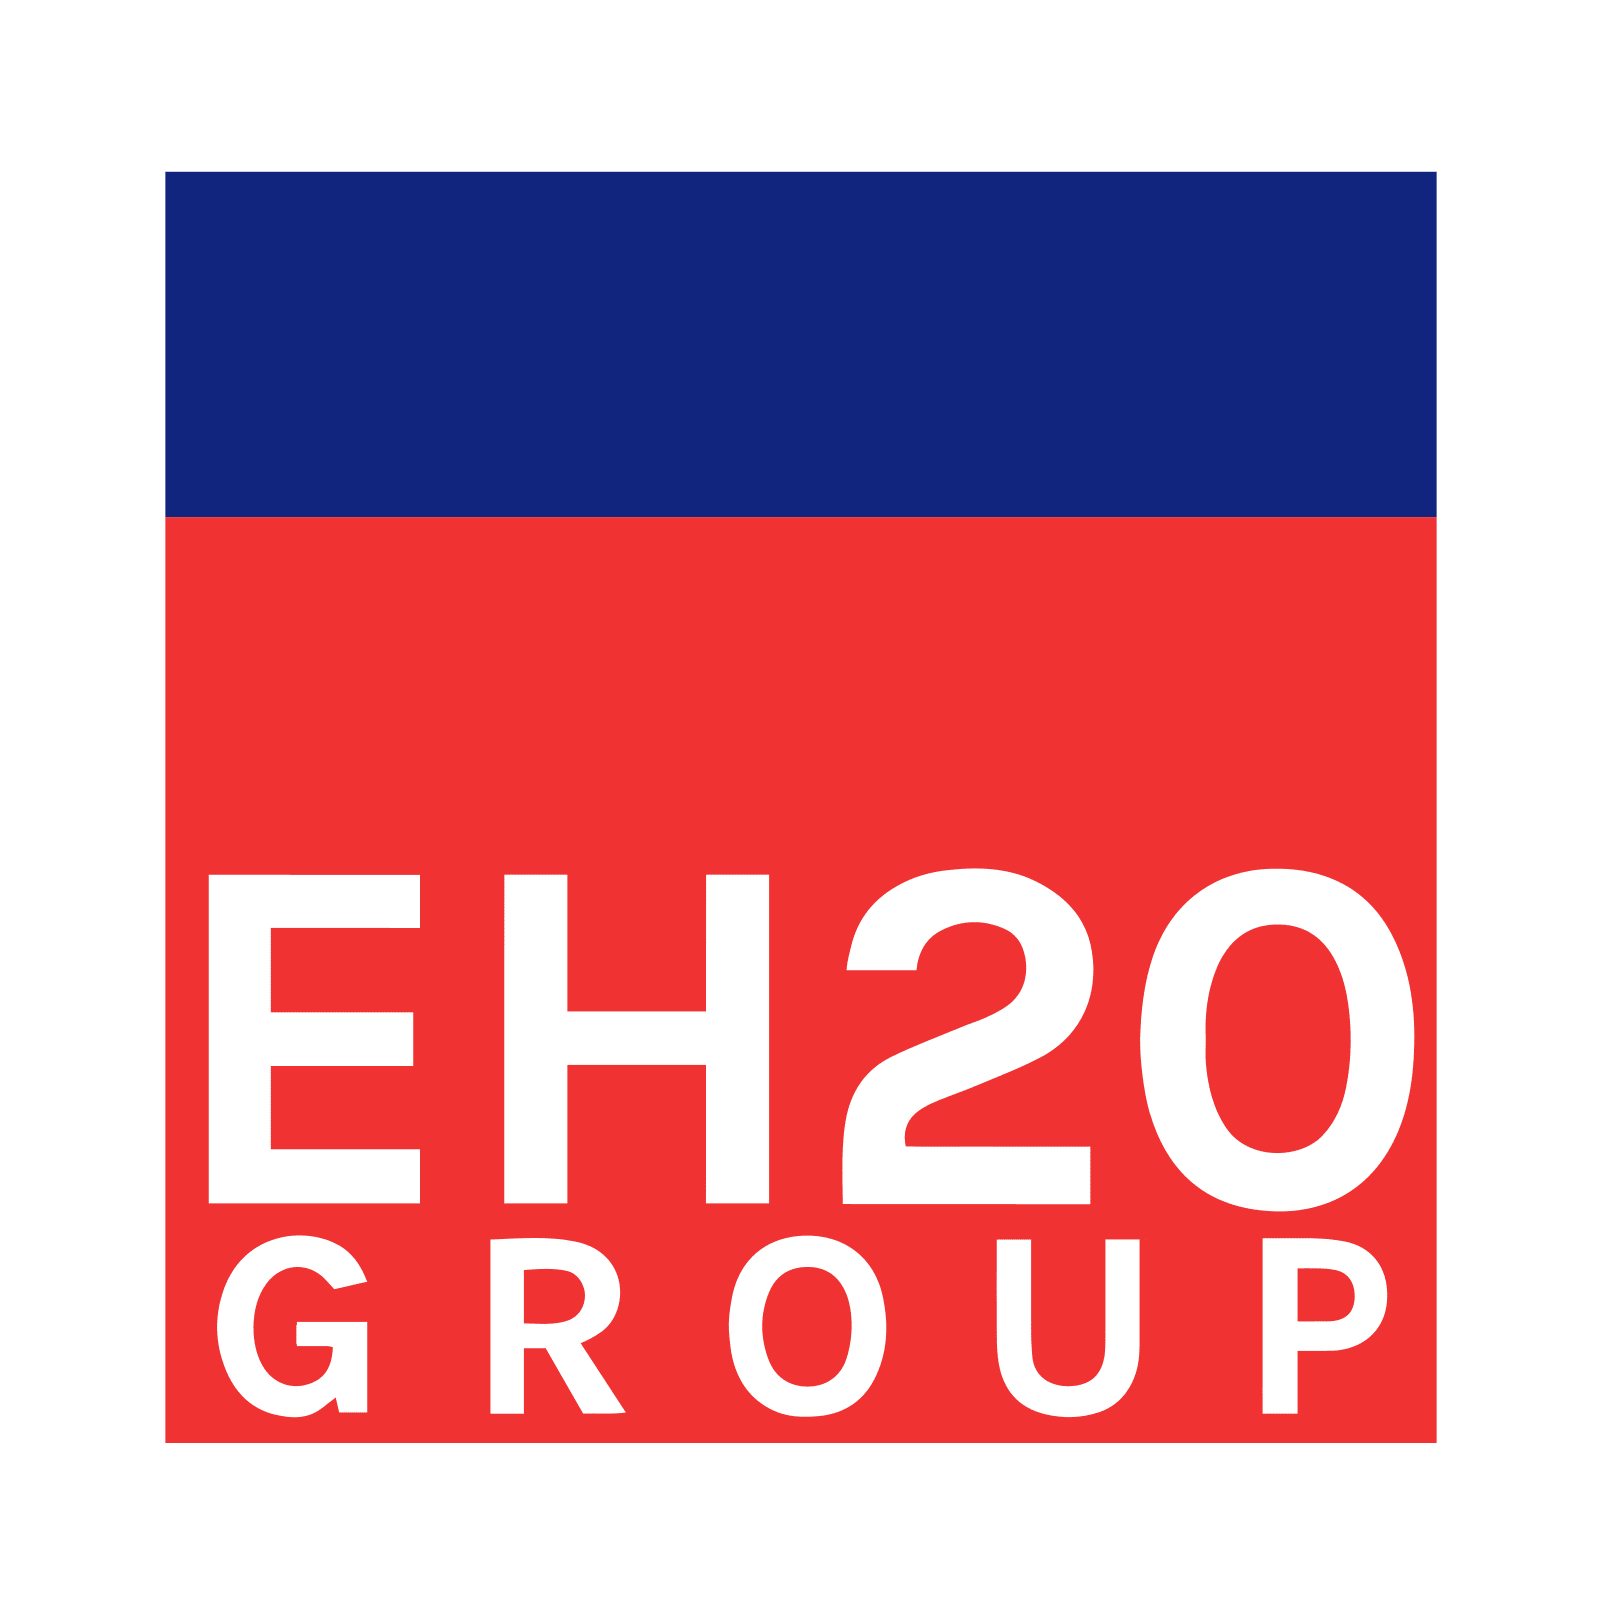 EH20 Group